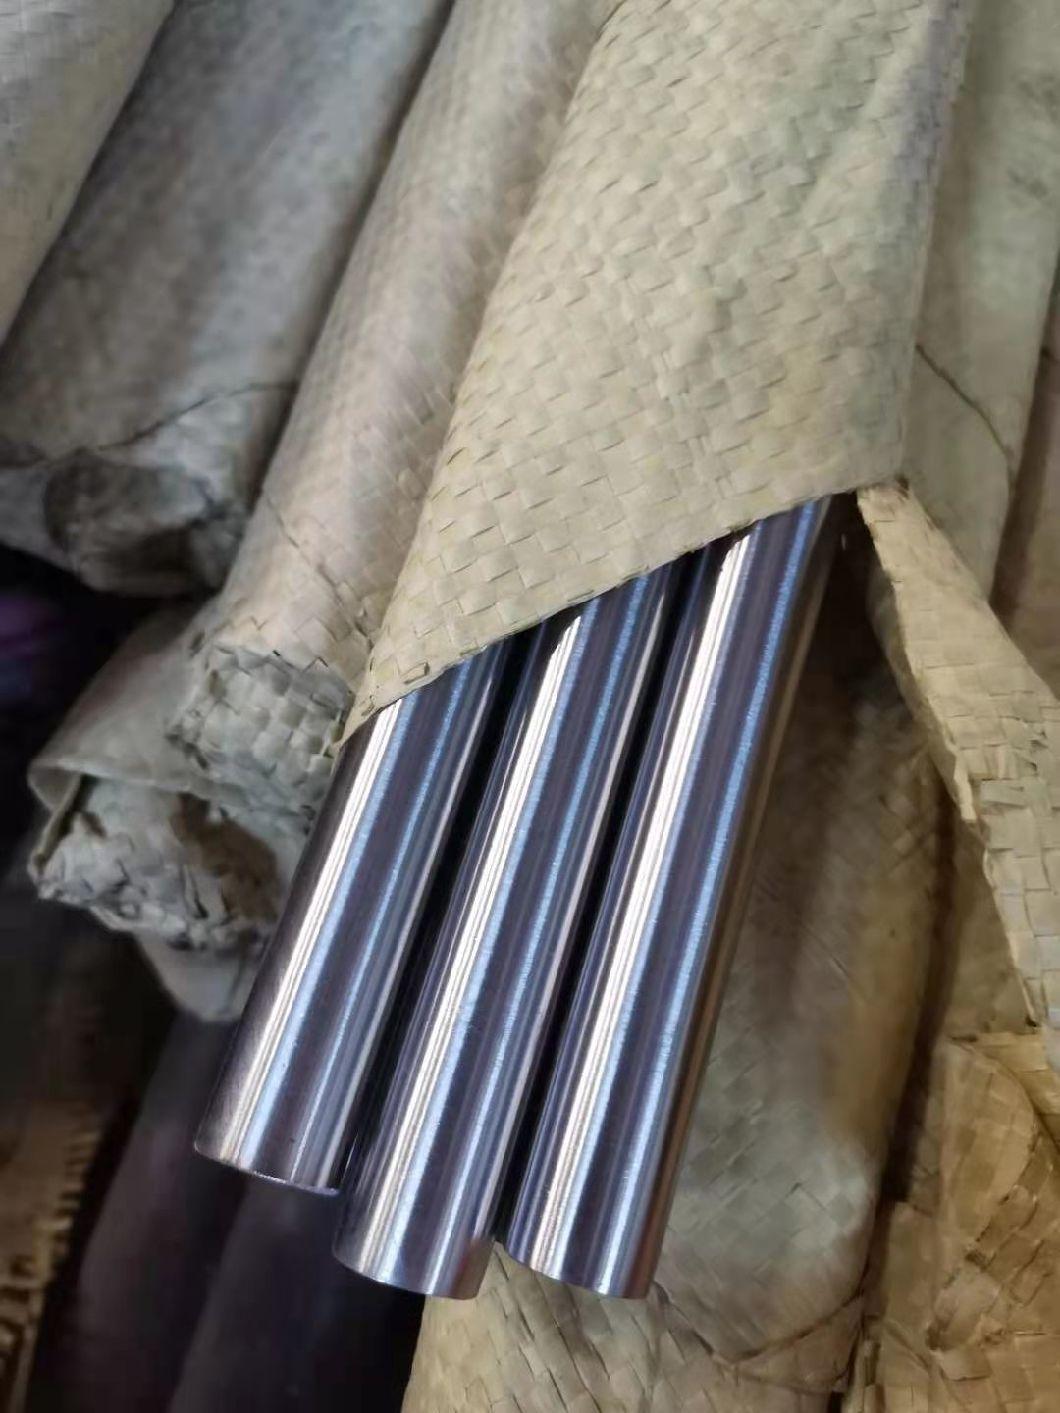 Professional Manufacture Cheap Mirror Polished 304 Seamless Stainless Steel Pipe